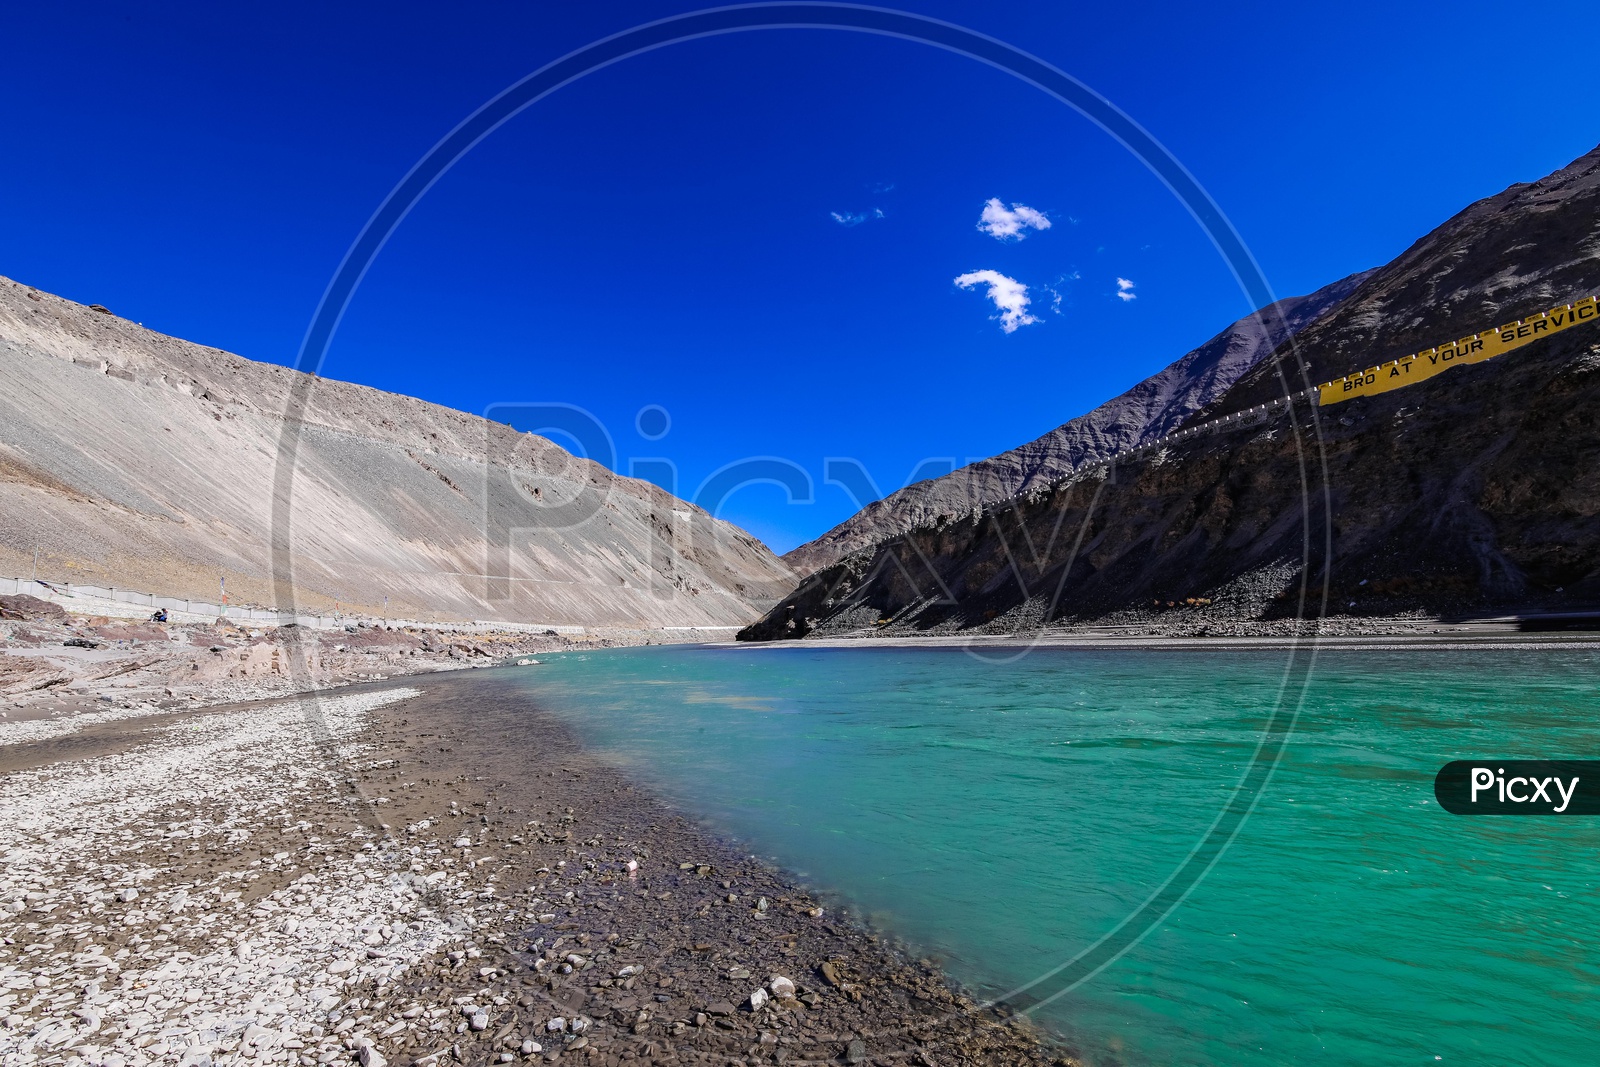 Indus River flowing by the mountains